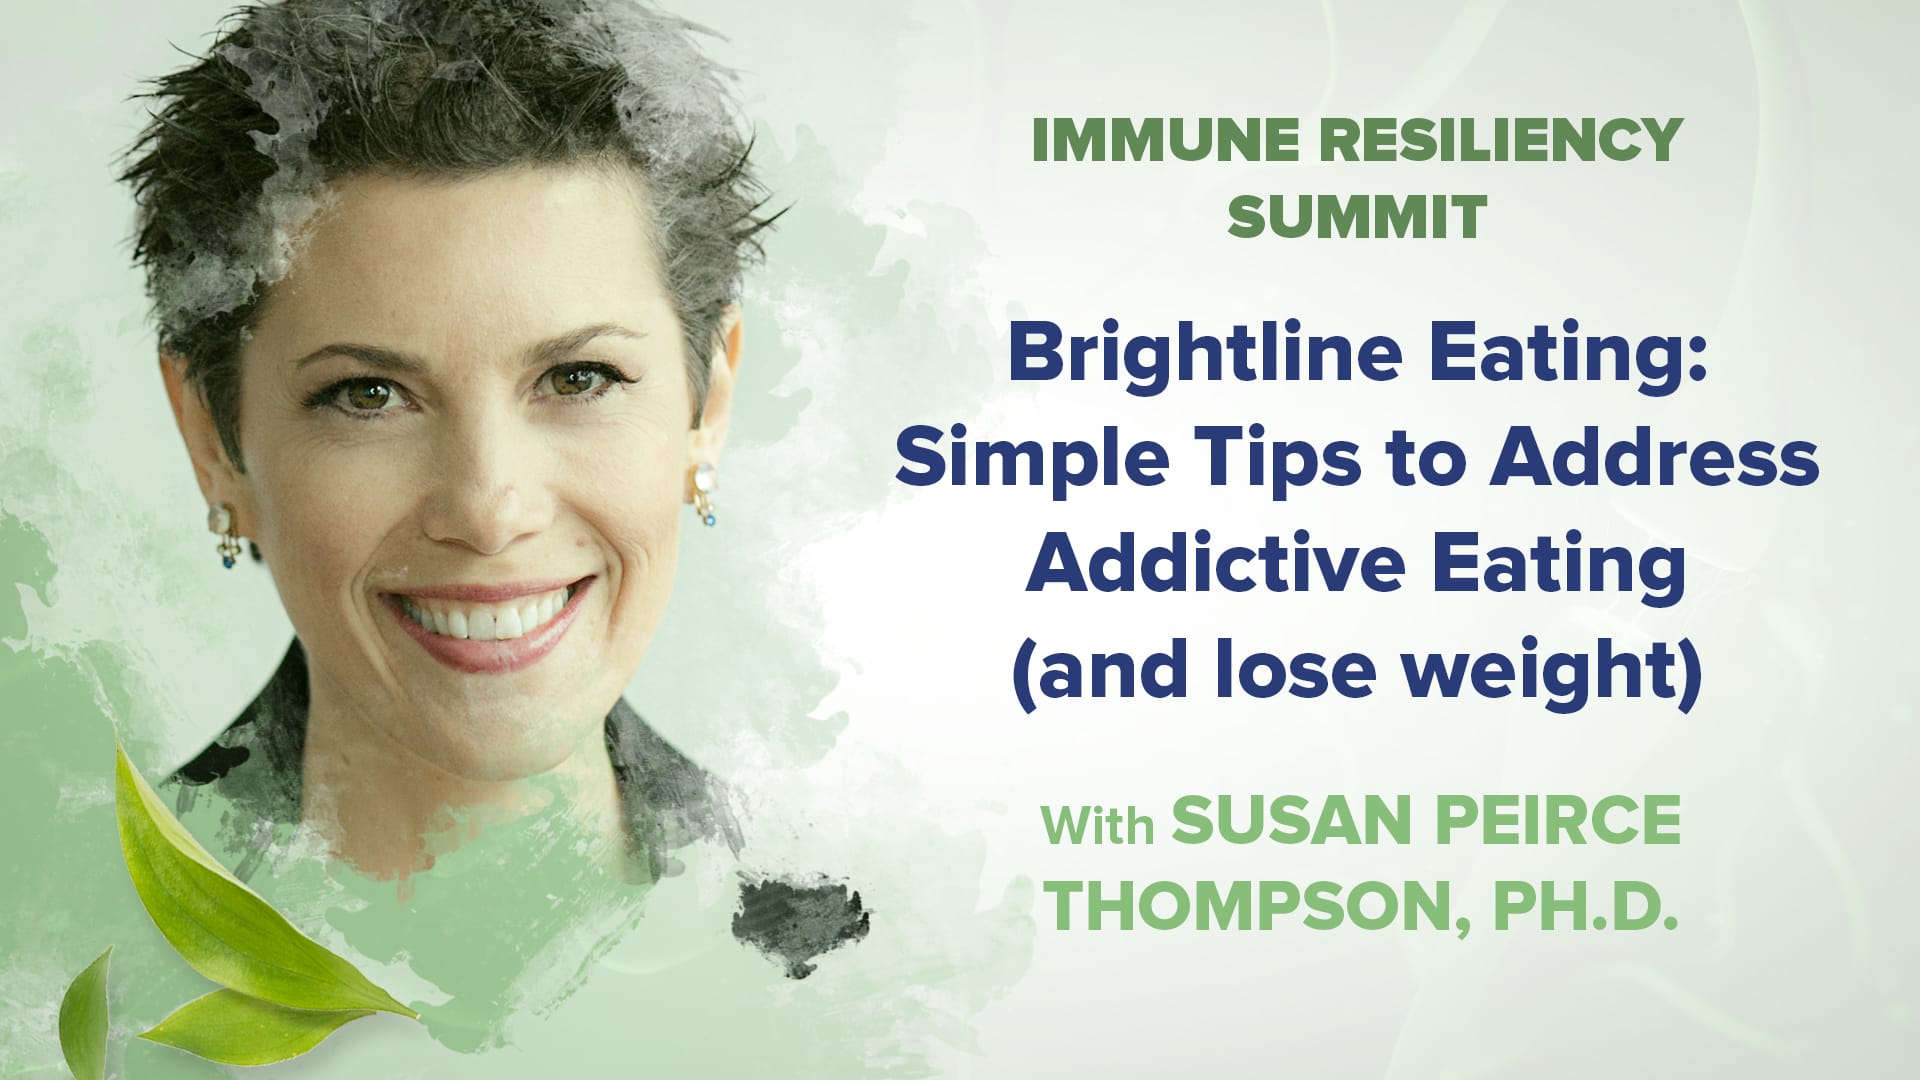 Brightline Eating: Simple Tips to Address Addictive Eating (and lose weight)